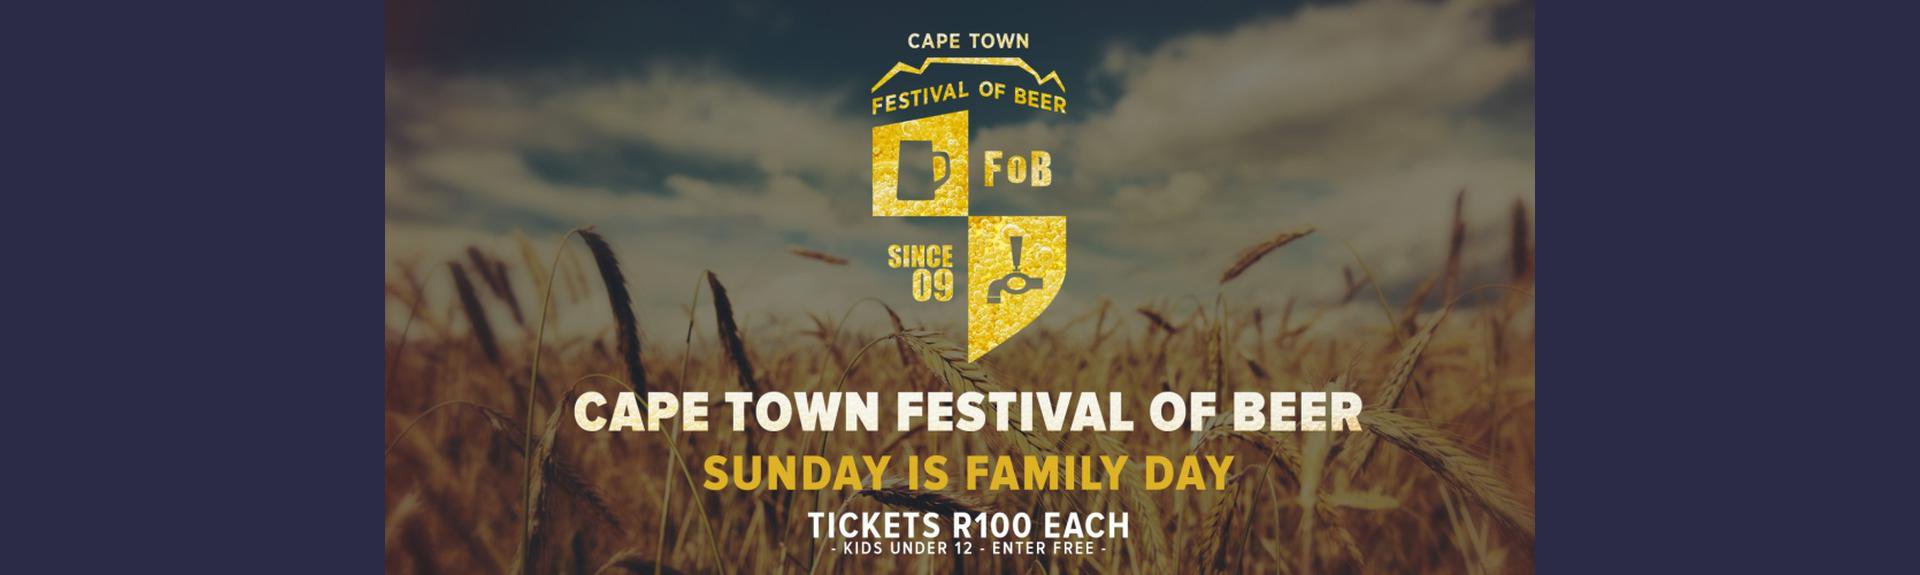 The Cape Town Festival of Beer